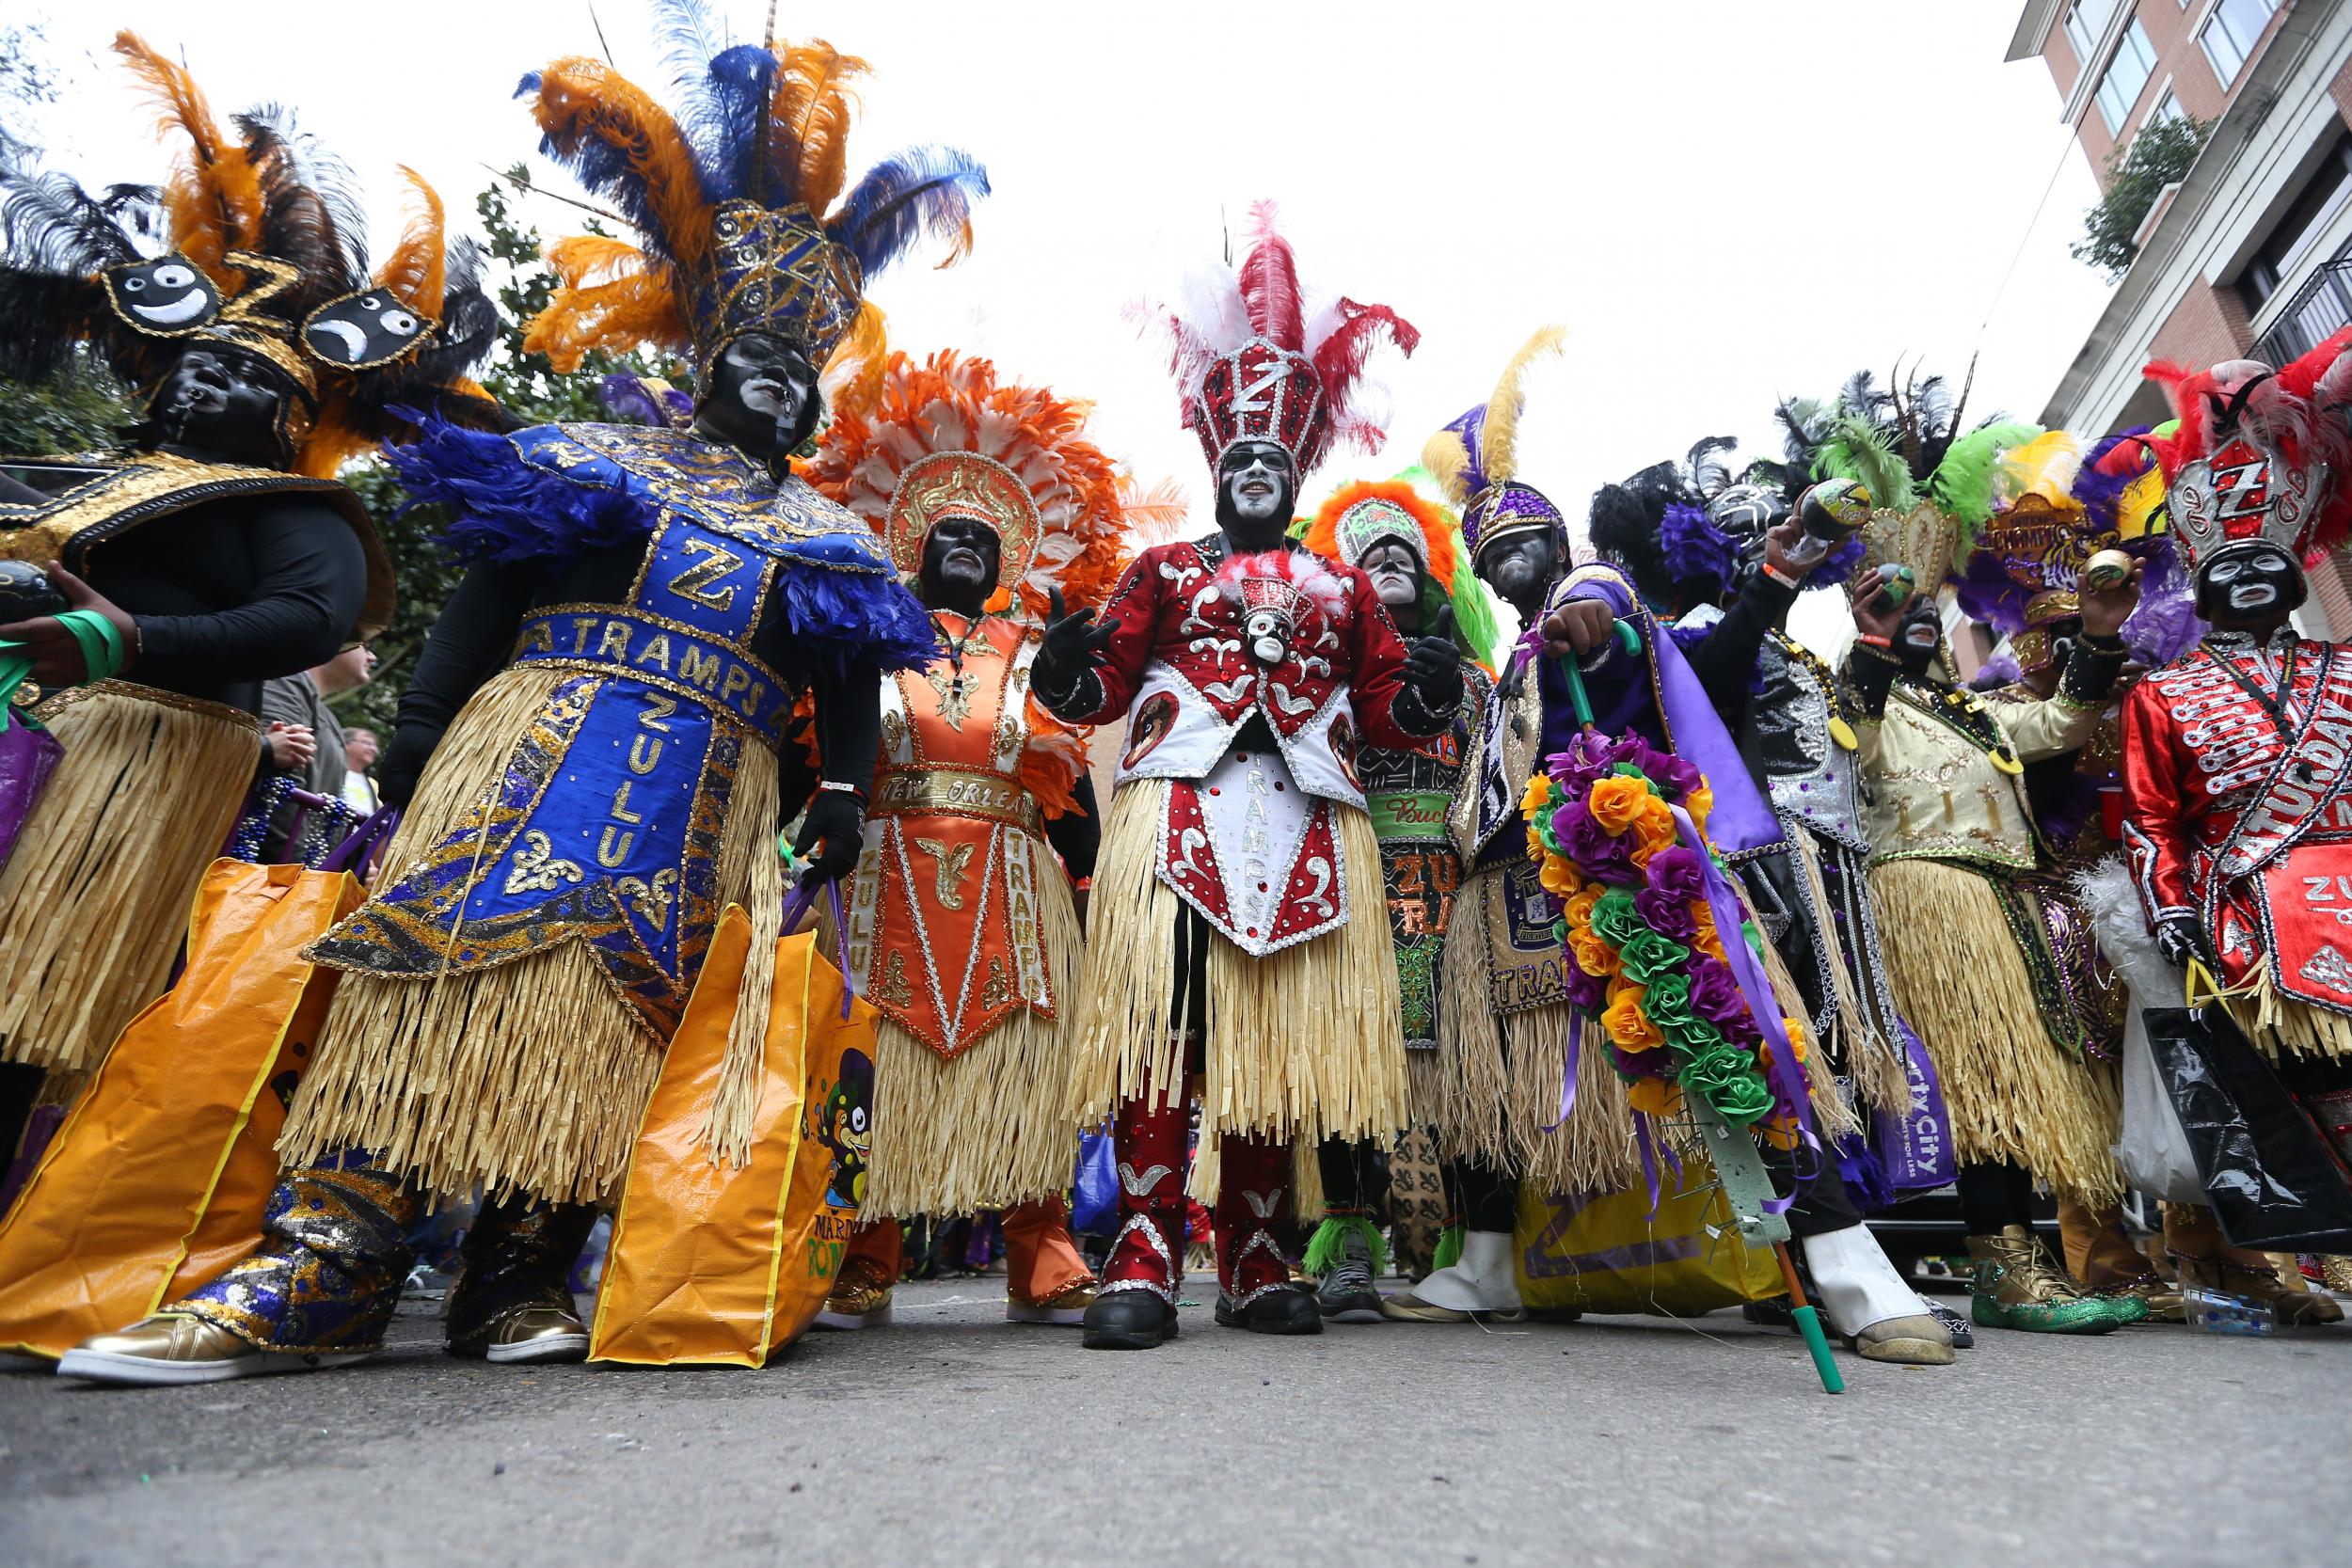 Members of the Zulu Social Aid &amp; Please Club parade on 25 February in New Orleans.